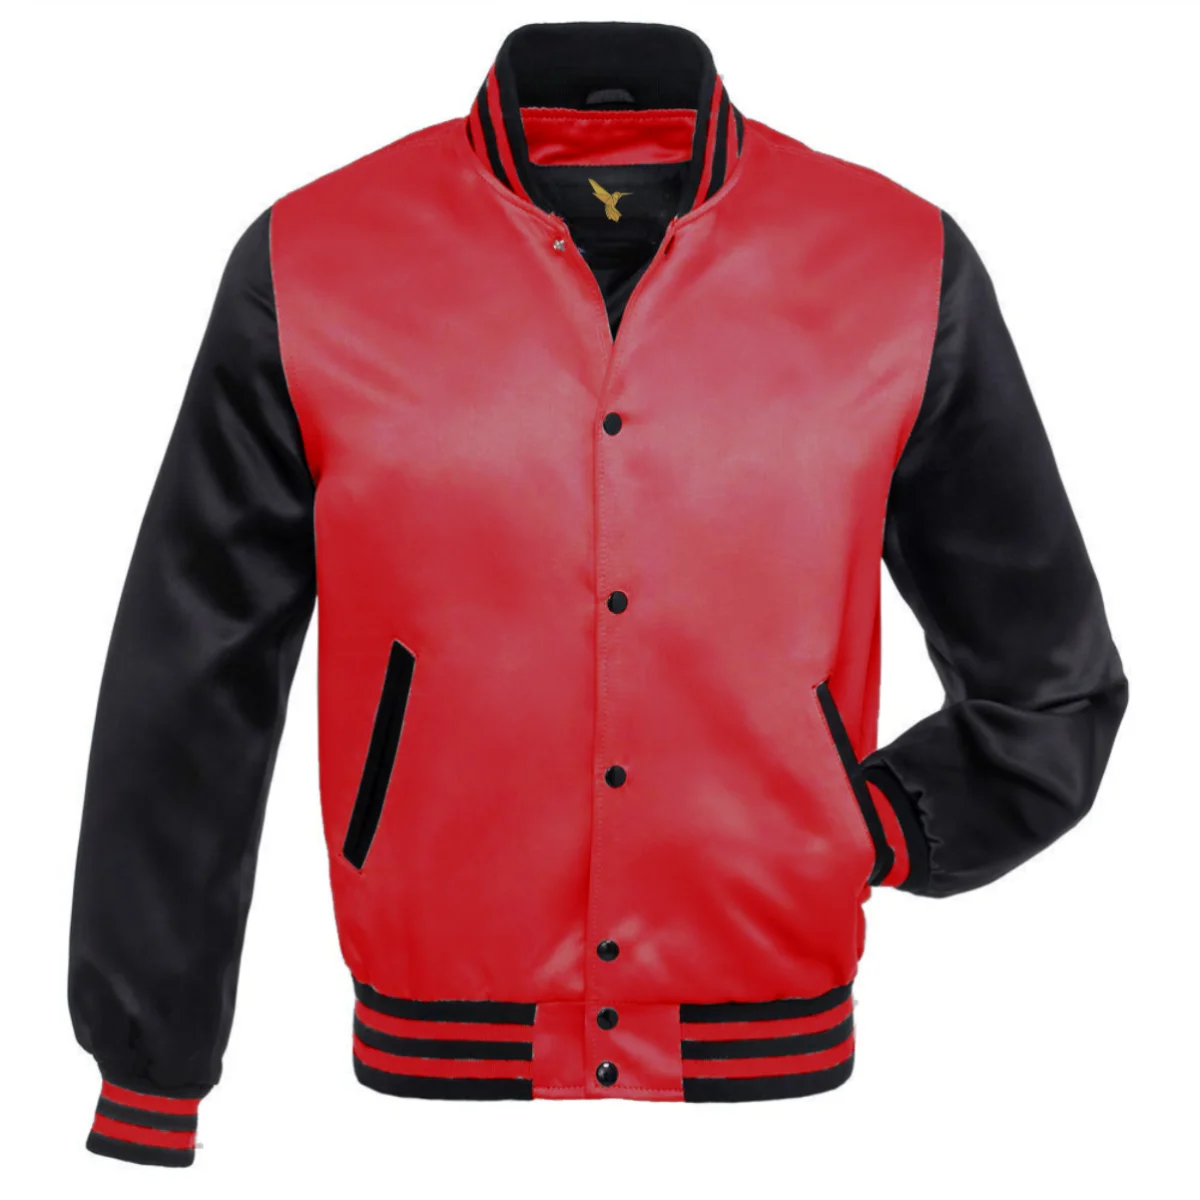 Front Image of Red Varsity Jacket